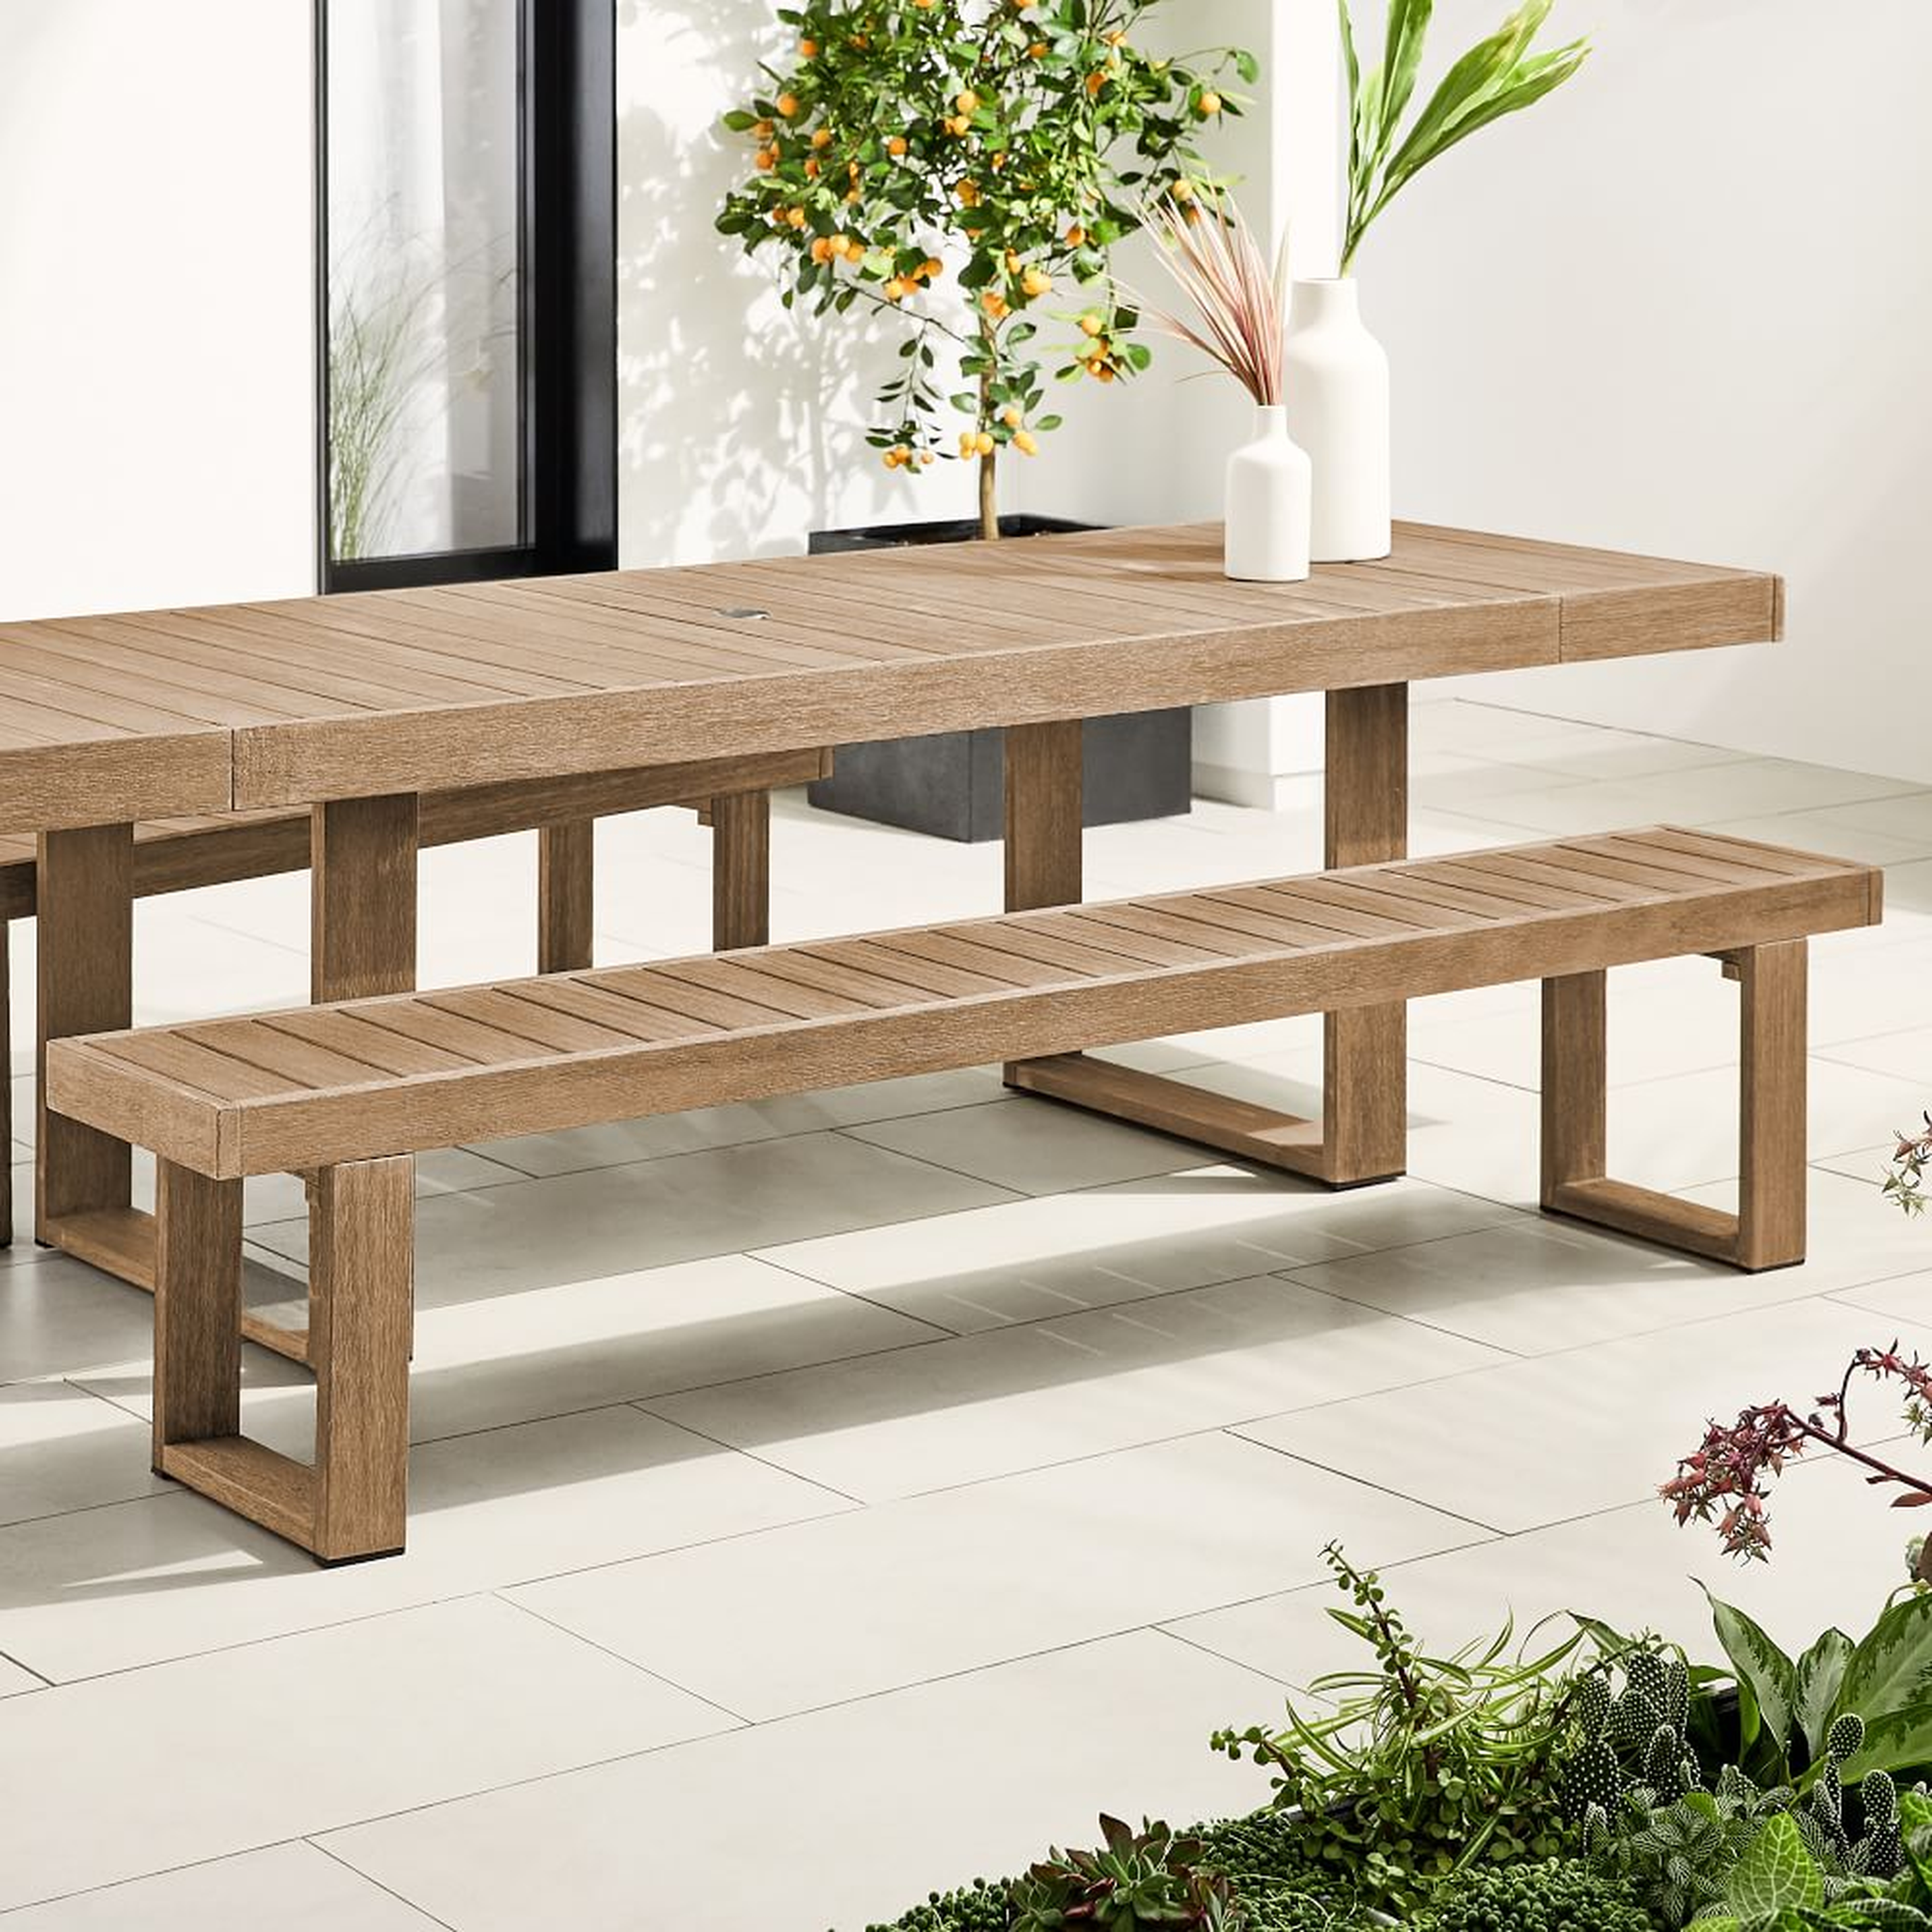 Portside Outdoor Dining Bench, 88.5", Driftwood - West Elm